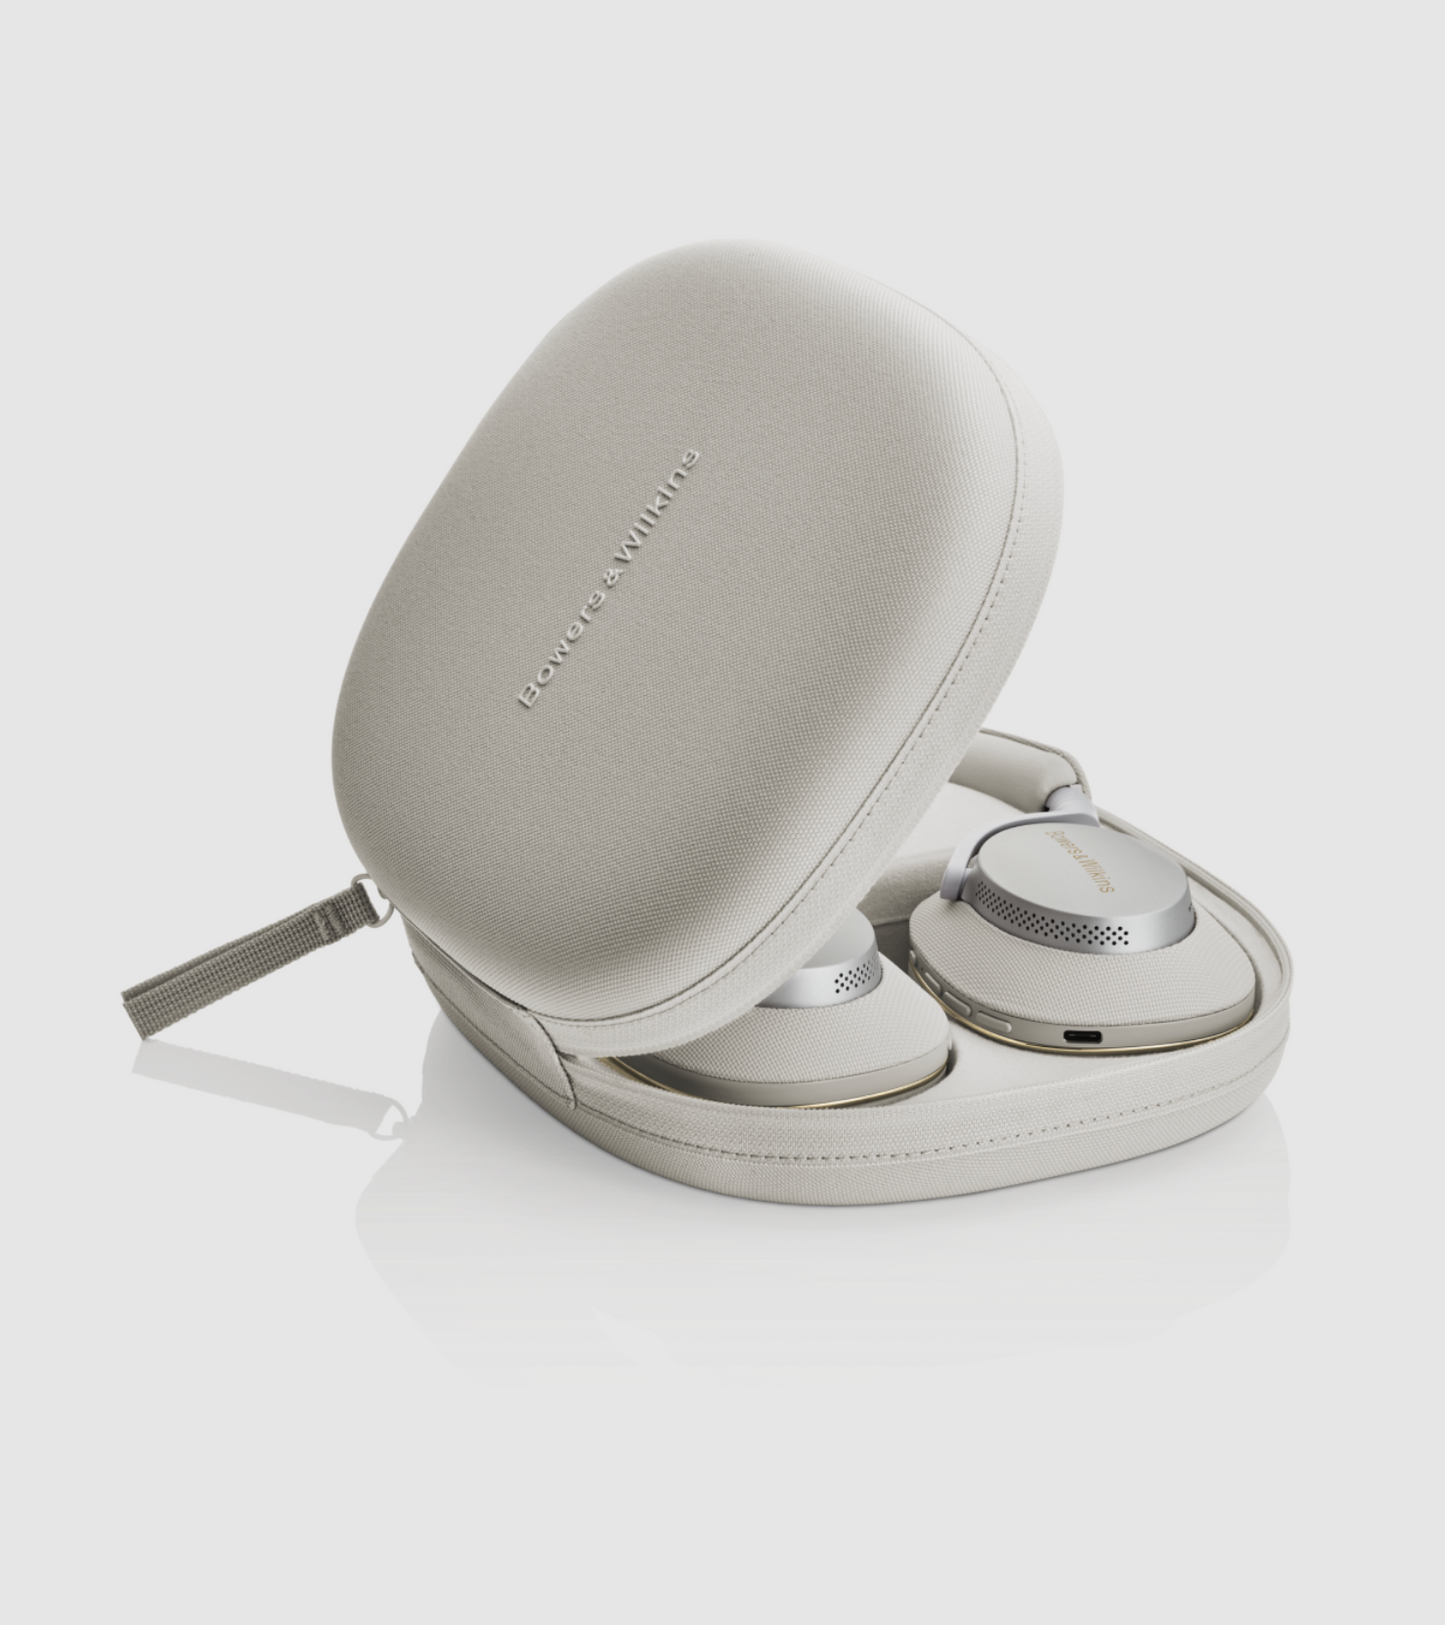 B&W Px7 S2e Noise Cancelling Headphones in Cloud Gray. Image in case